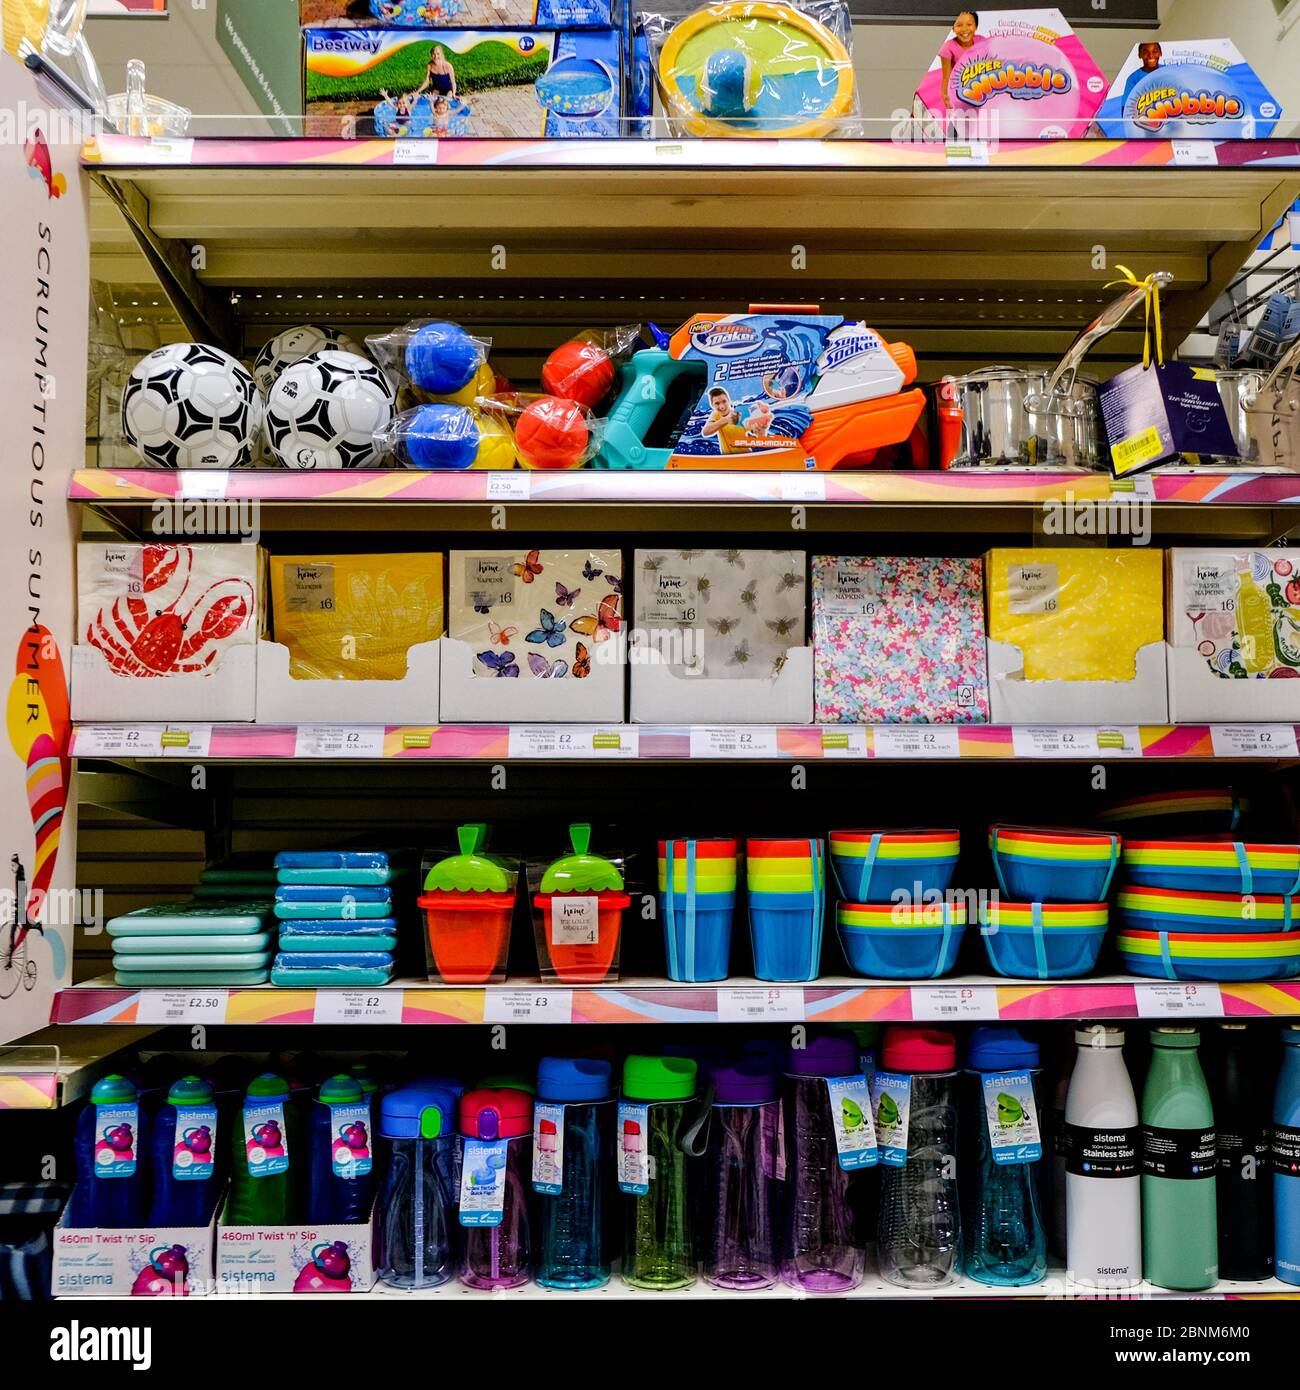 Supermarket Shelves With Colourful Plastic Outdoor Picnic Plates, Bowls And Glasses Stock Photo